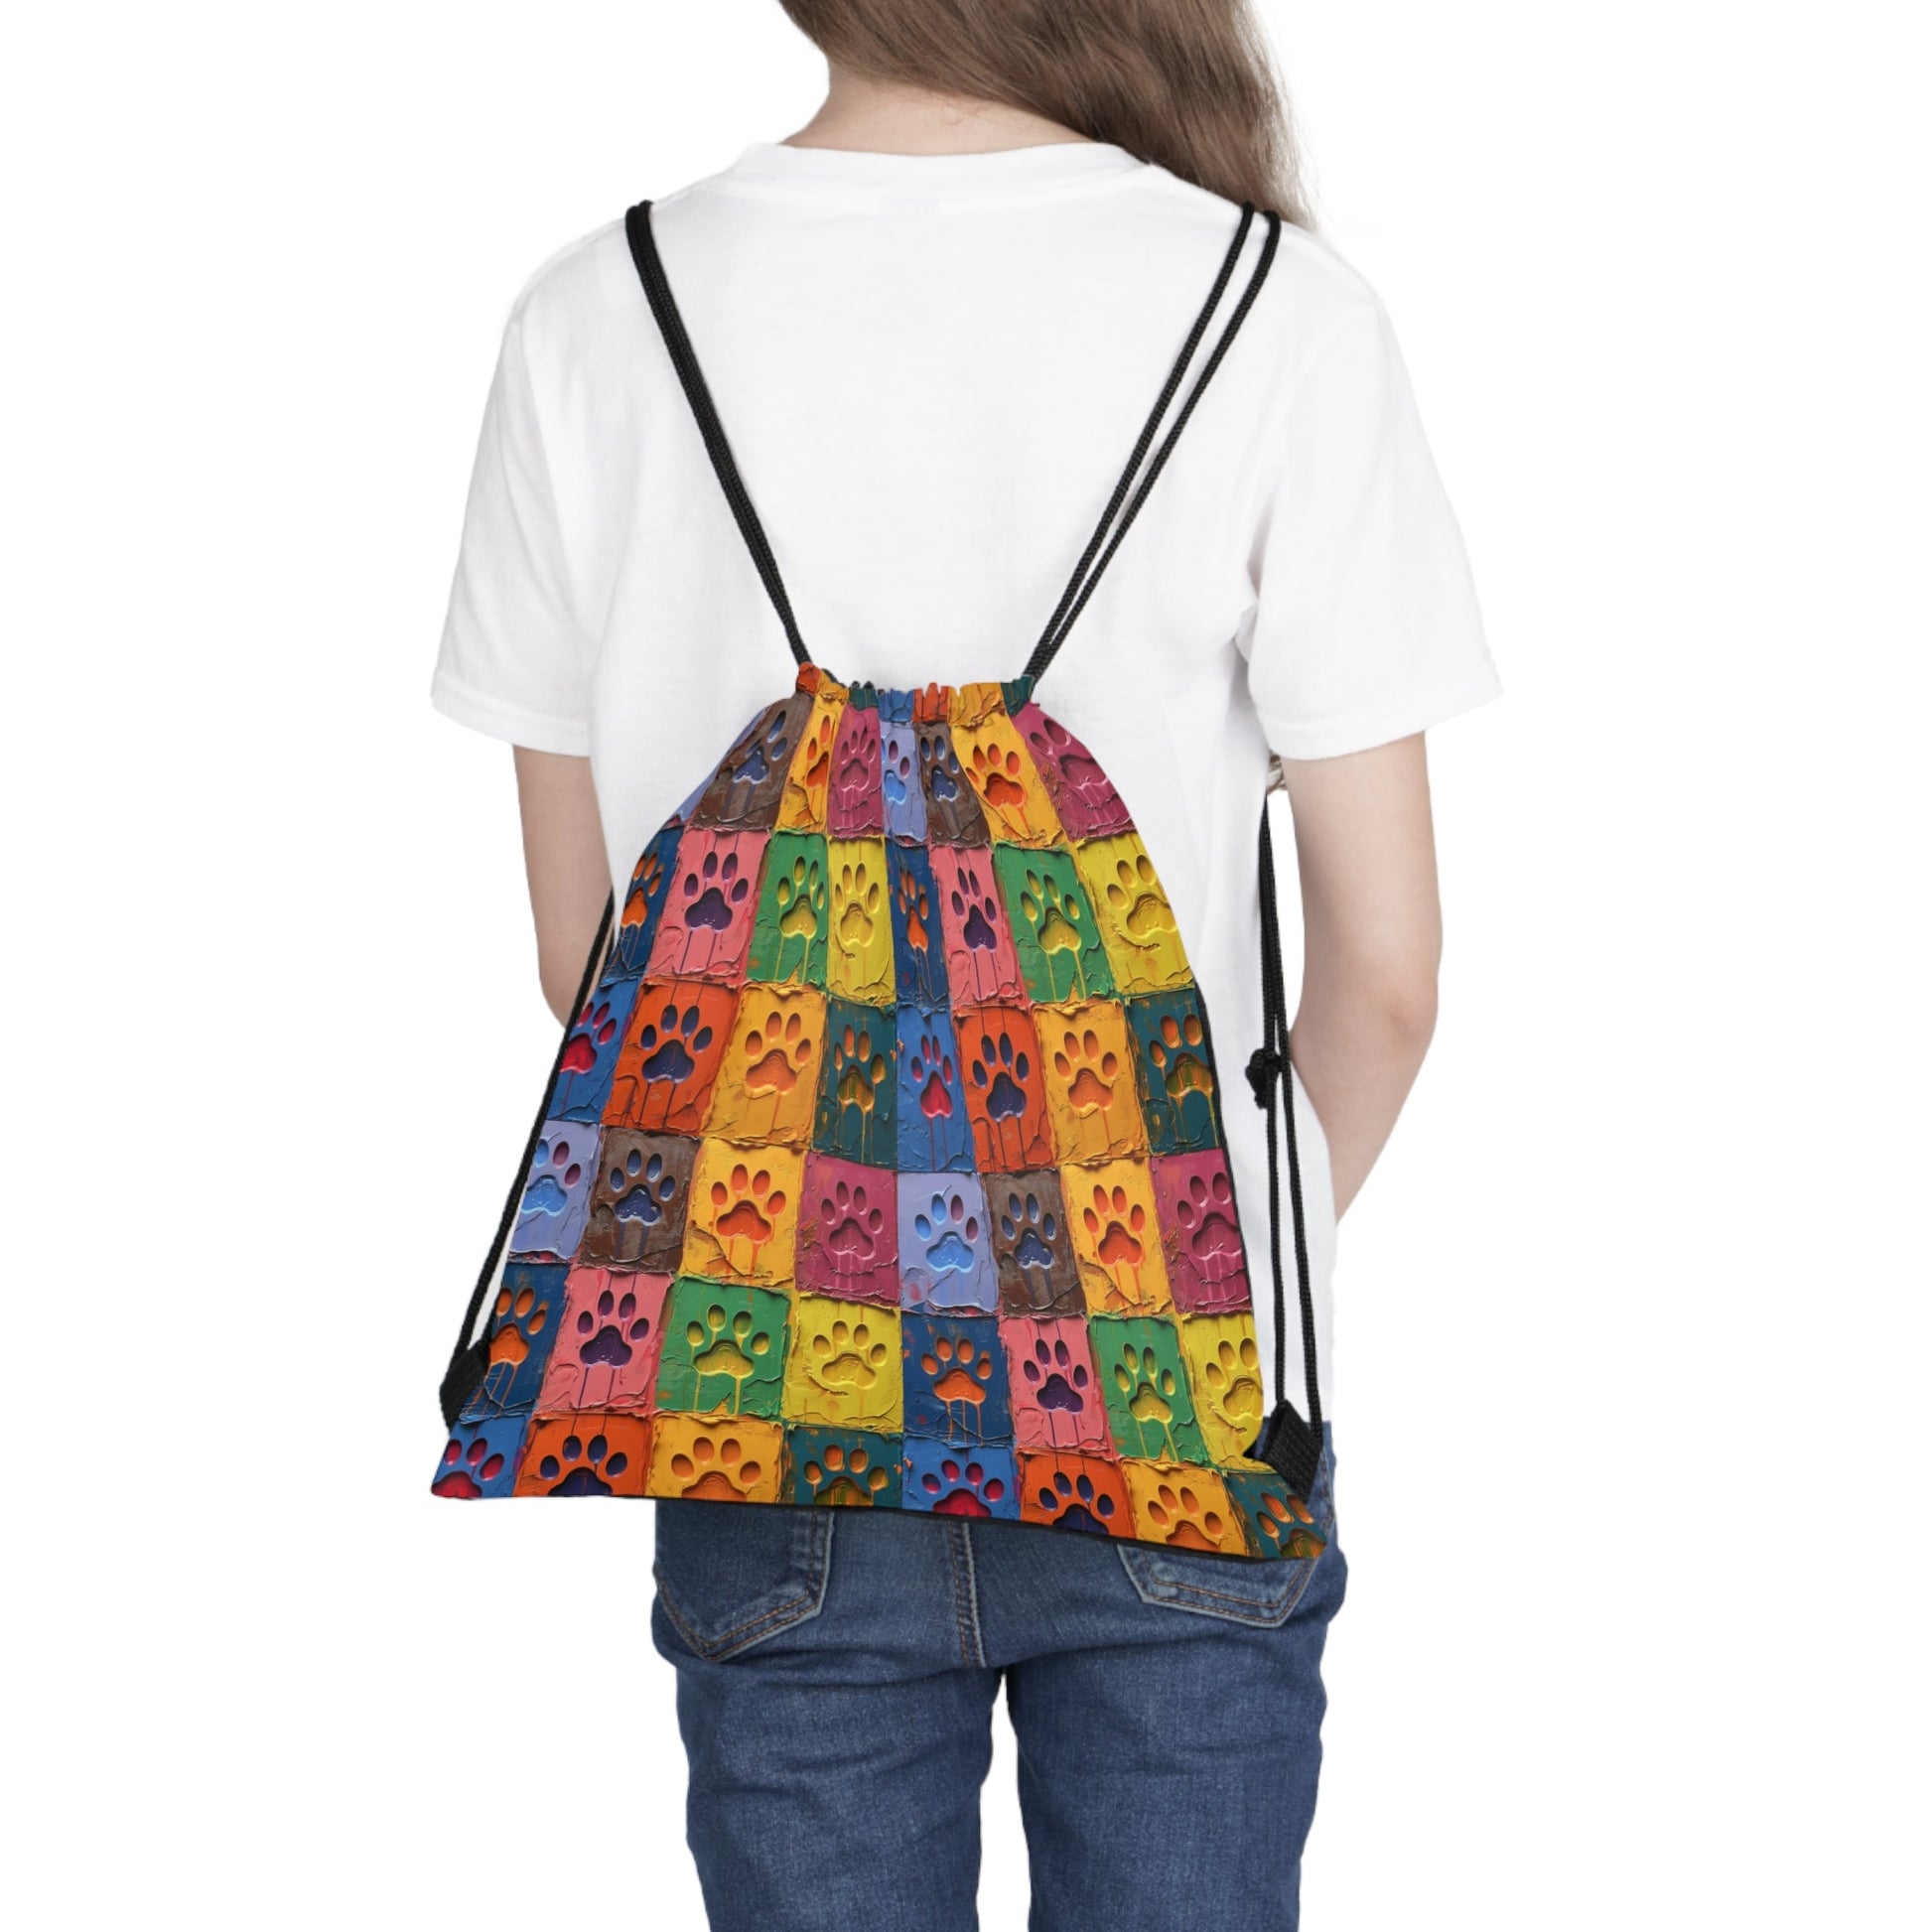 Outdoor Drawstring Bag Featuring Large Painted Paw Prints - Hobbster